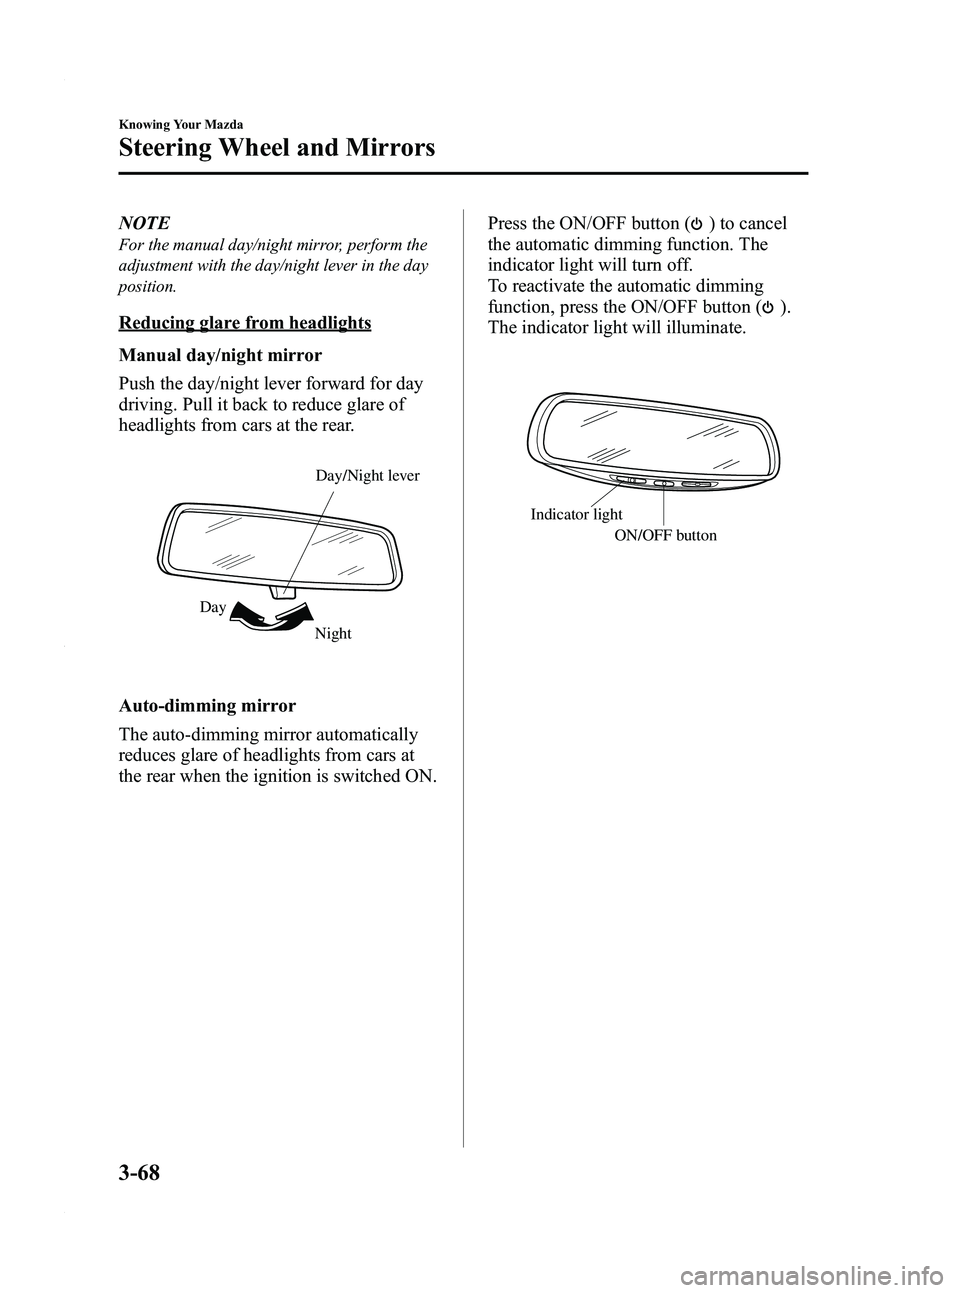 MAZDA MODEL 3 5-DOOR 2012  Owners Manual Black plate (146,1)
NOTE
For the manual day/night mirror, perform the
adjustment with the day/night lever in the day
position.
Reducing glare from headlights
Manual day/night mirror
Push the day/night